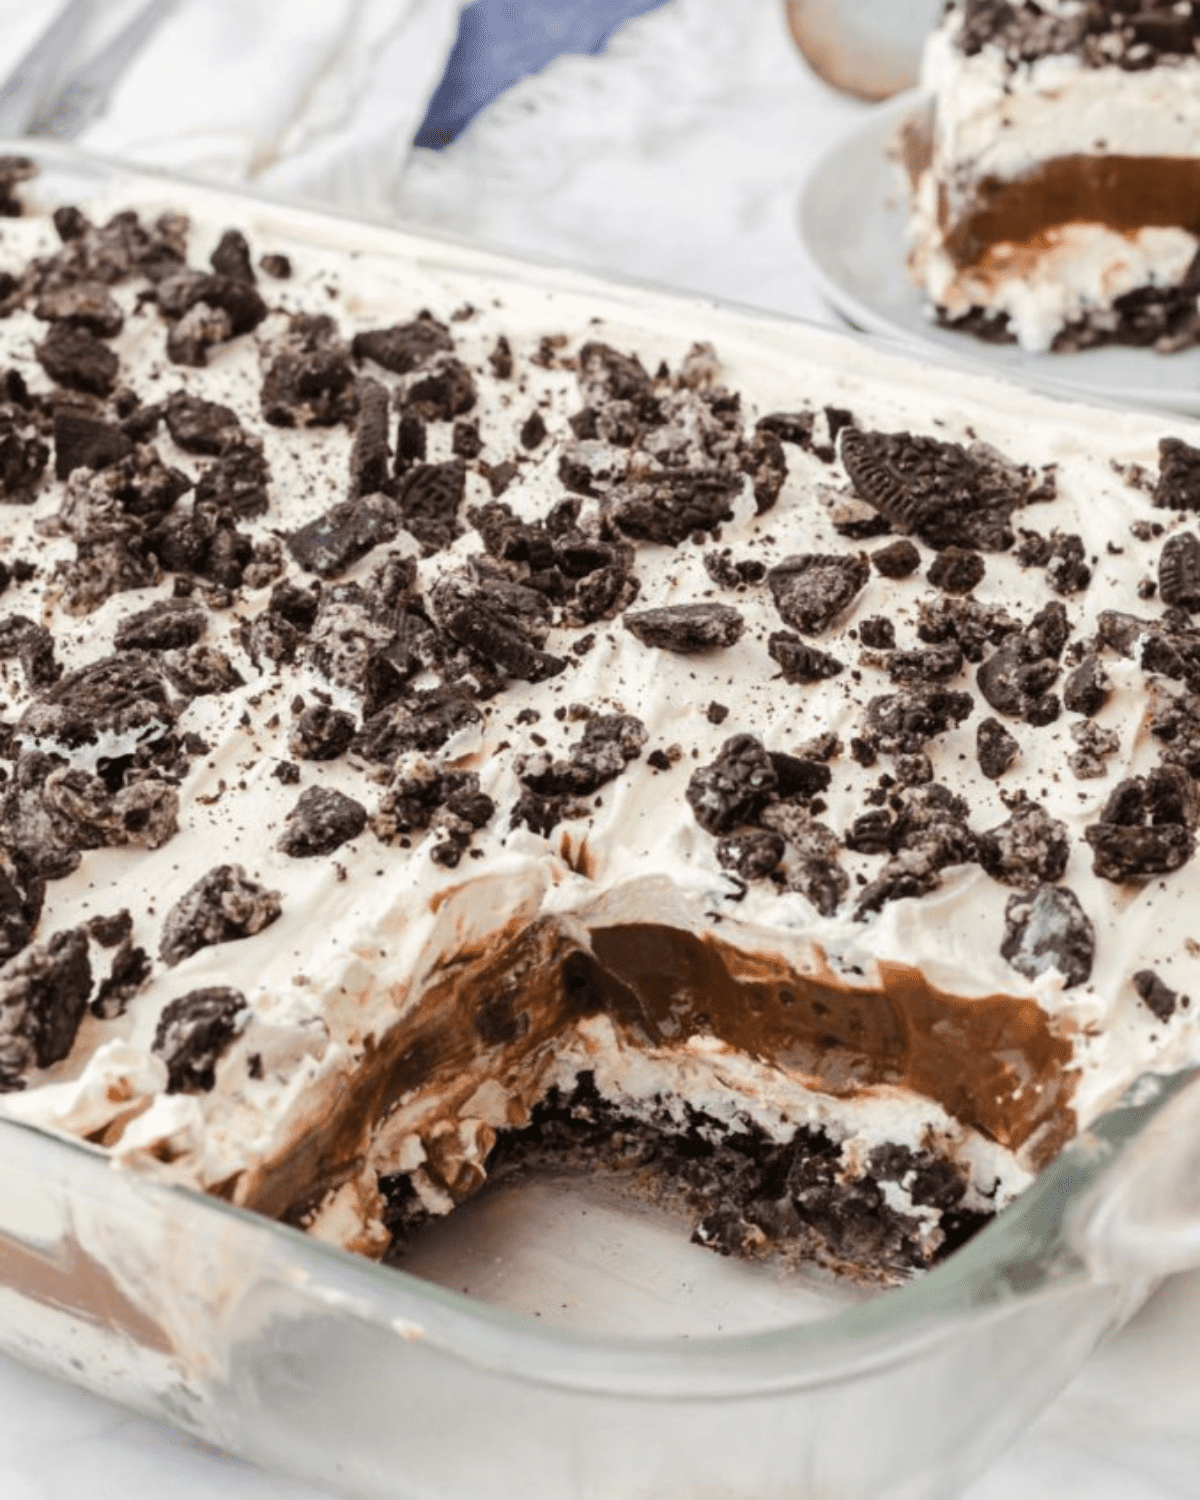 Pudding, cool whip and oreo cookies layered in a baking dish